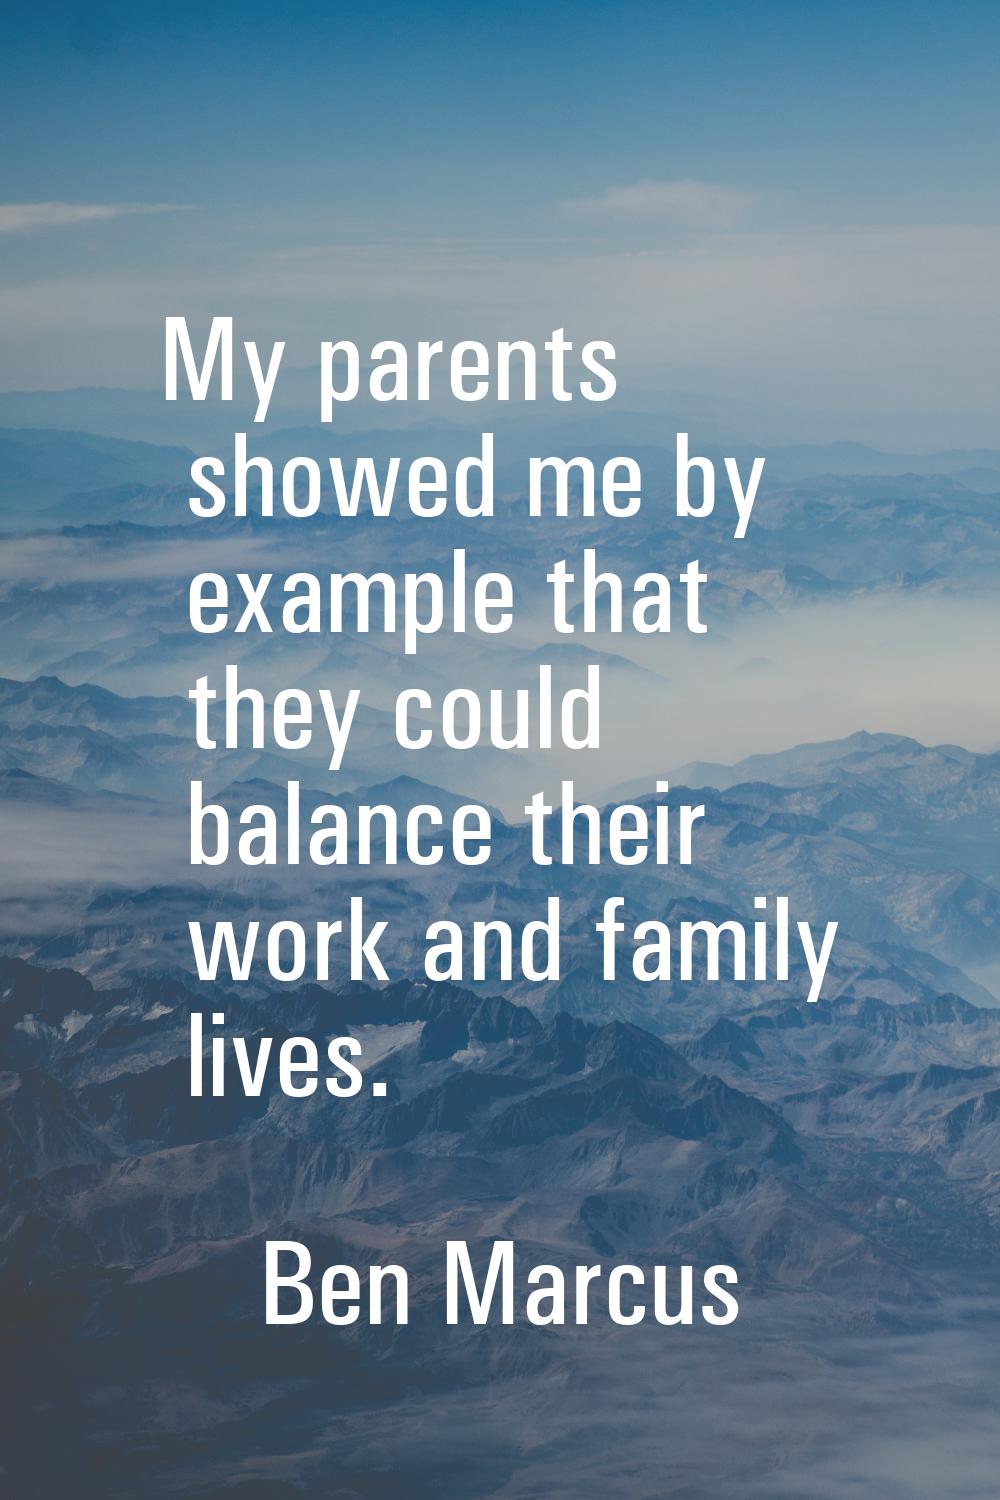 My parents showed me by example that they could balance their work and family lives.